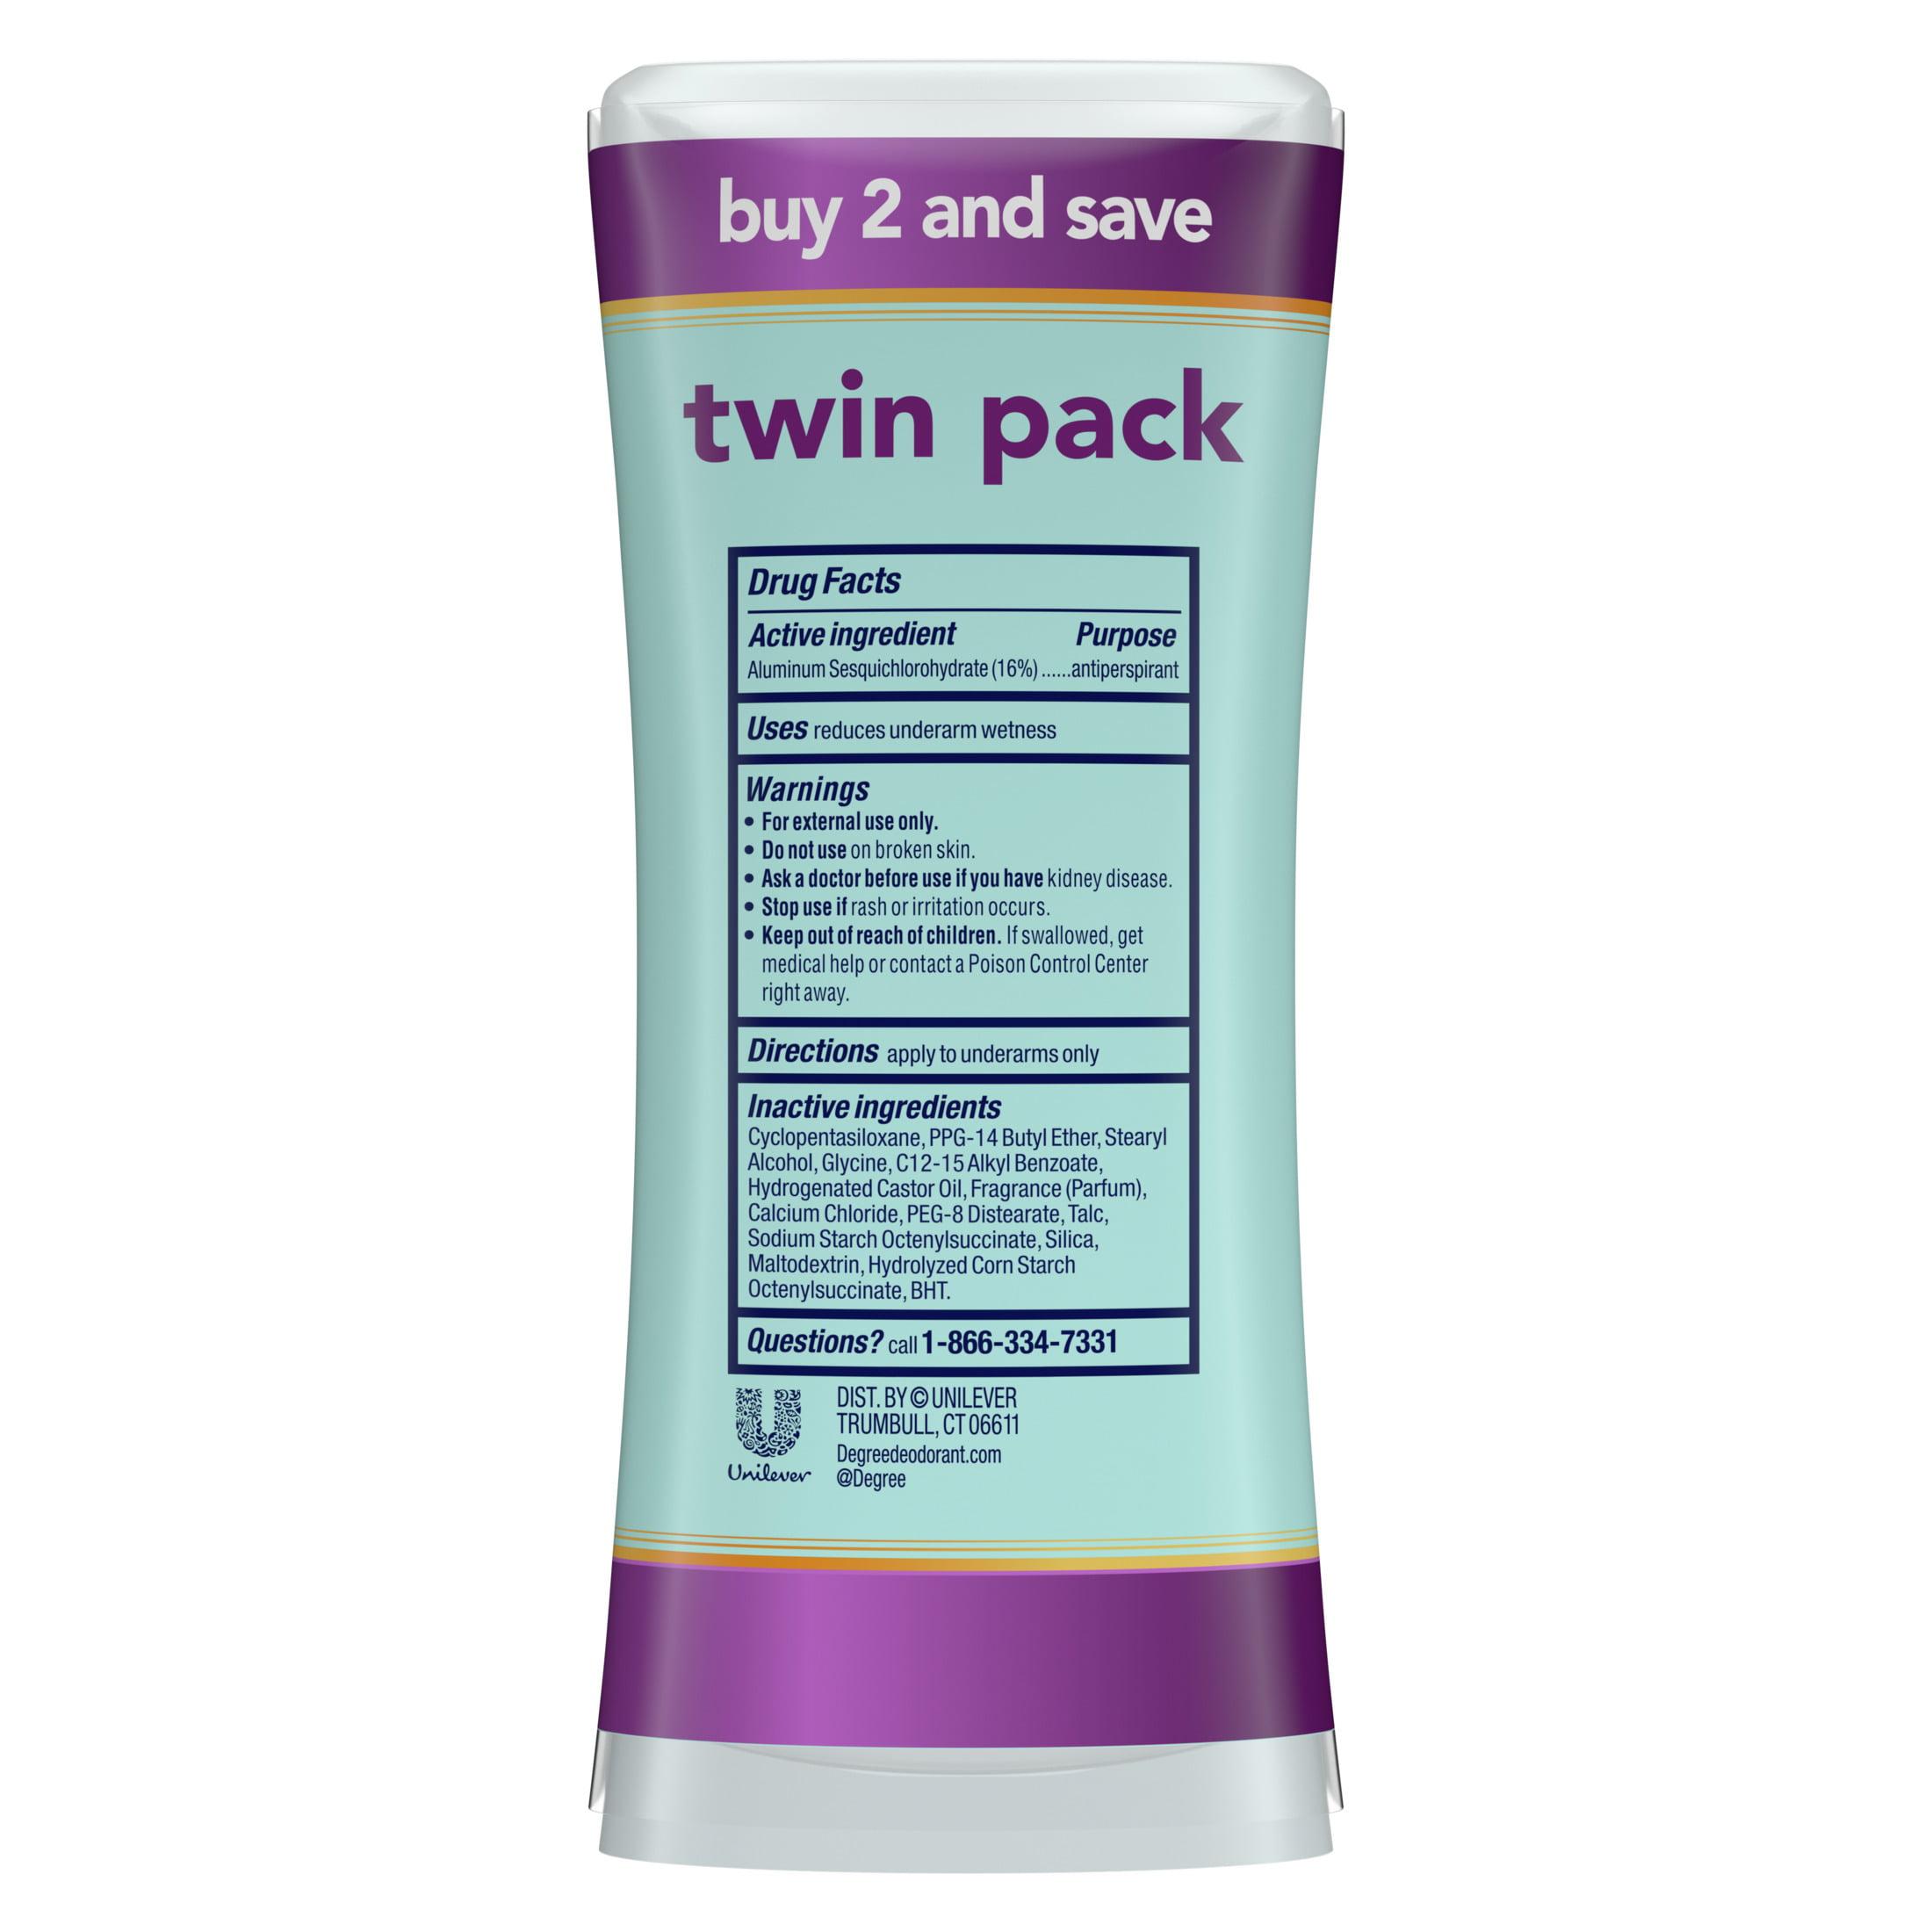 Degree Advanced Women's Antiperspirant Deodorant Stick Twin Pack Sexy Intrigue, 2.6 oz - image 4 of 7